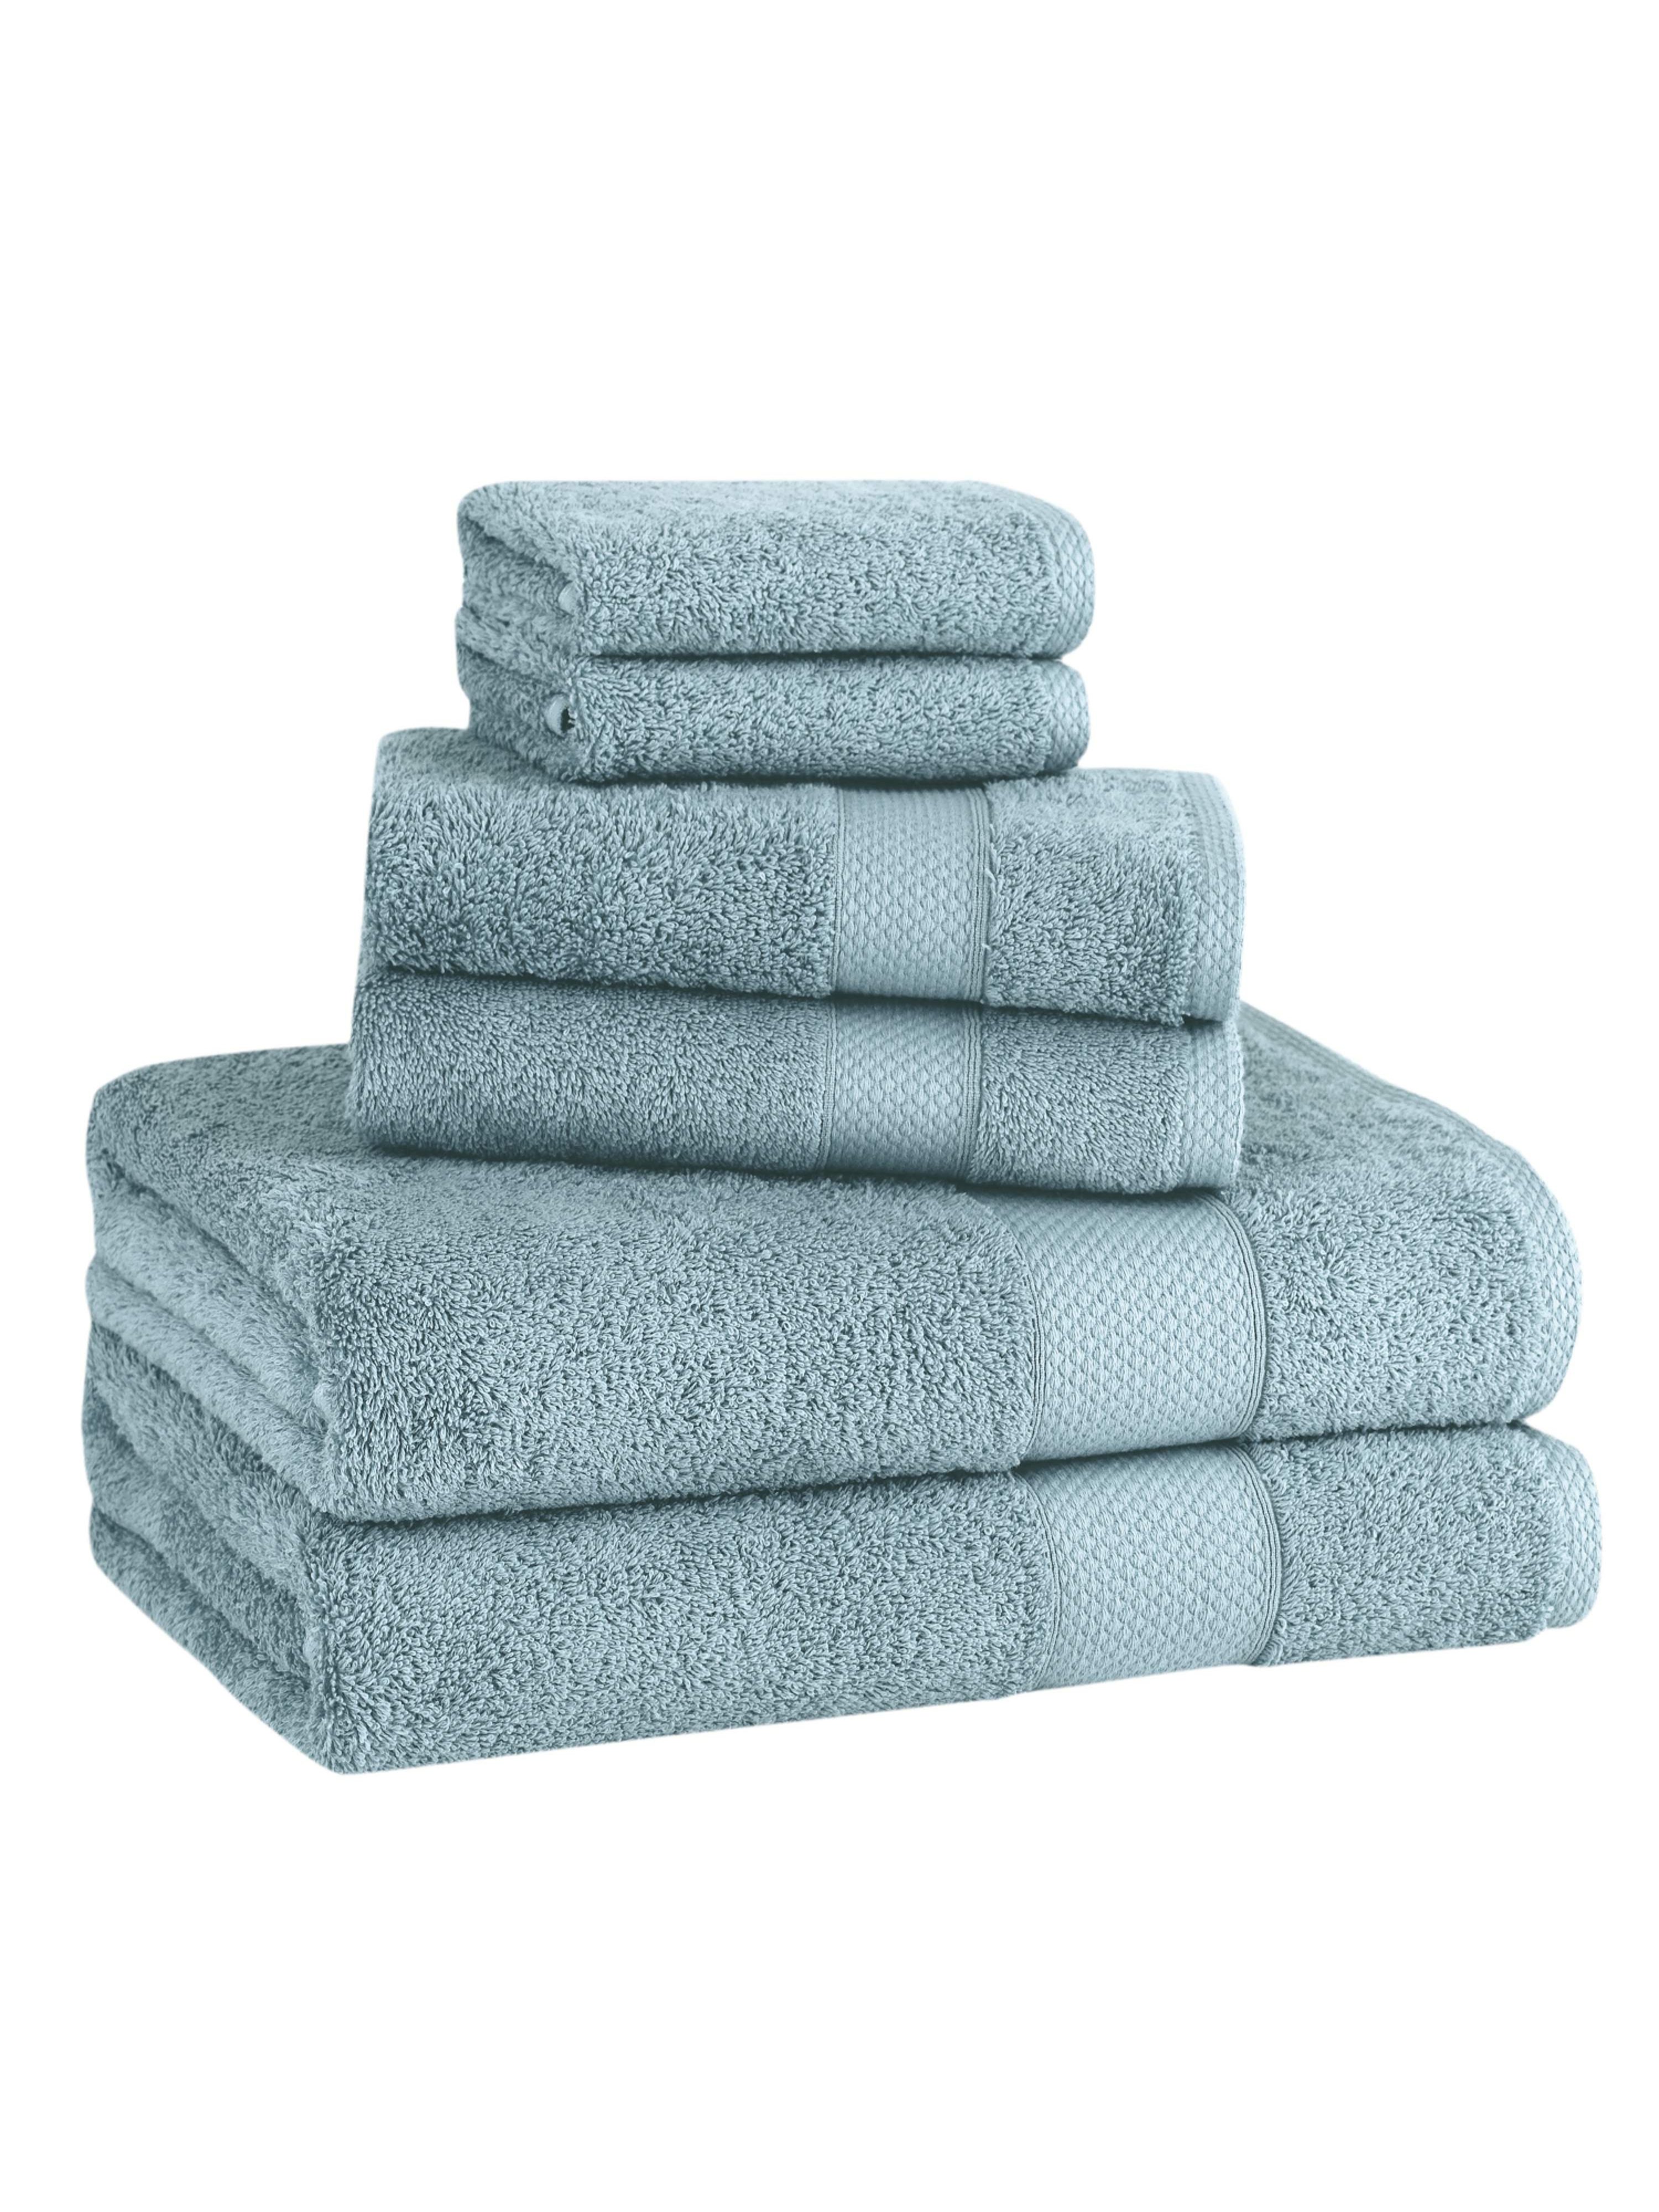 Classic Turkish Towels Genuine Cotton Soft Absorbent Luxury Madison 6 Piece S In Blue